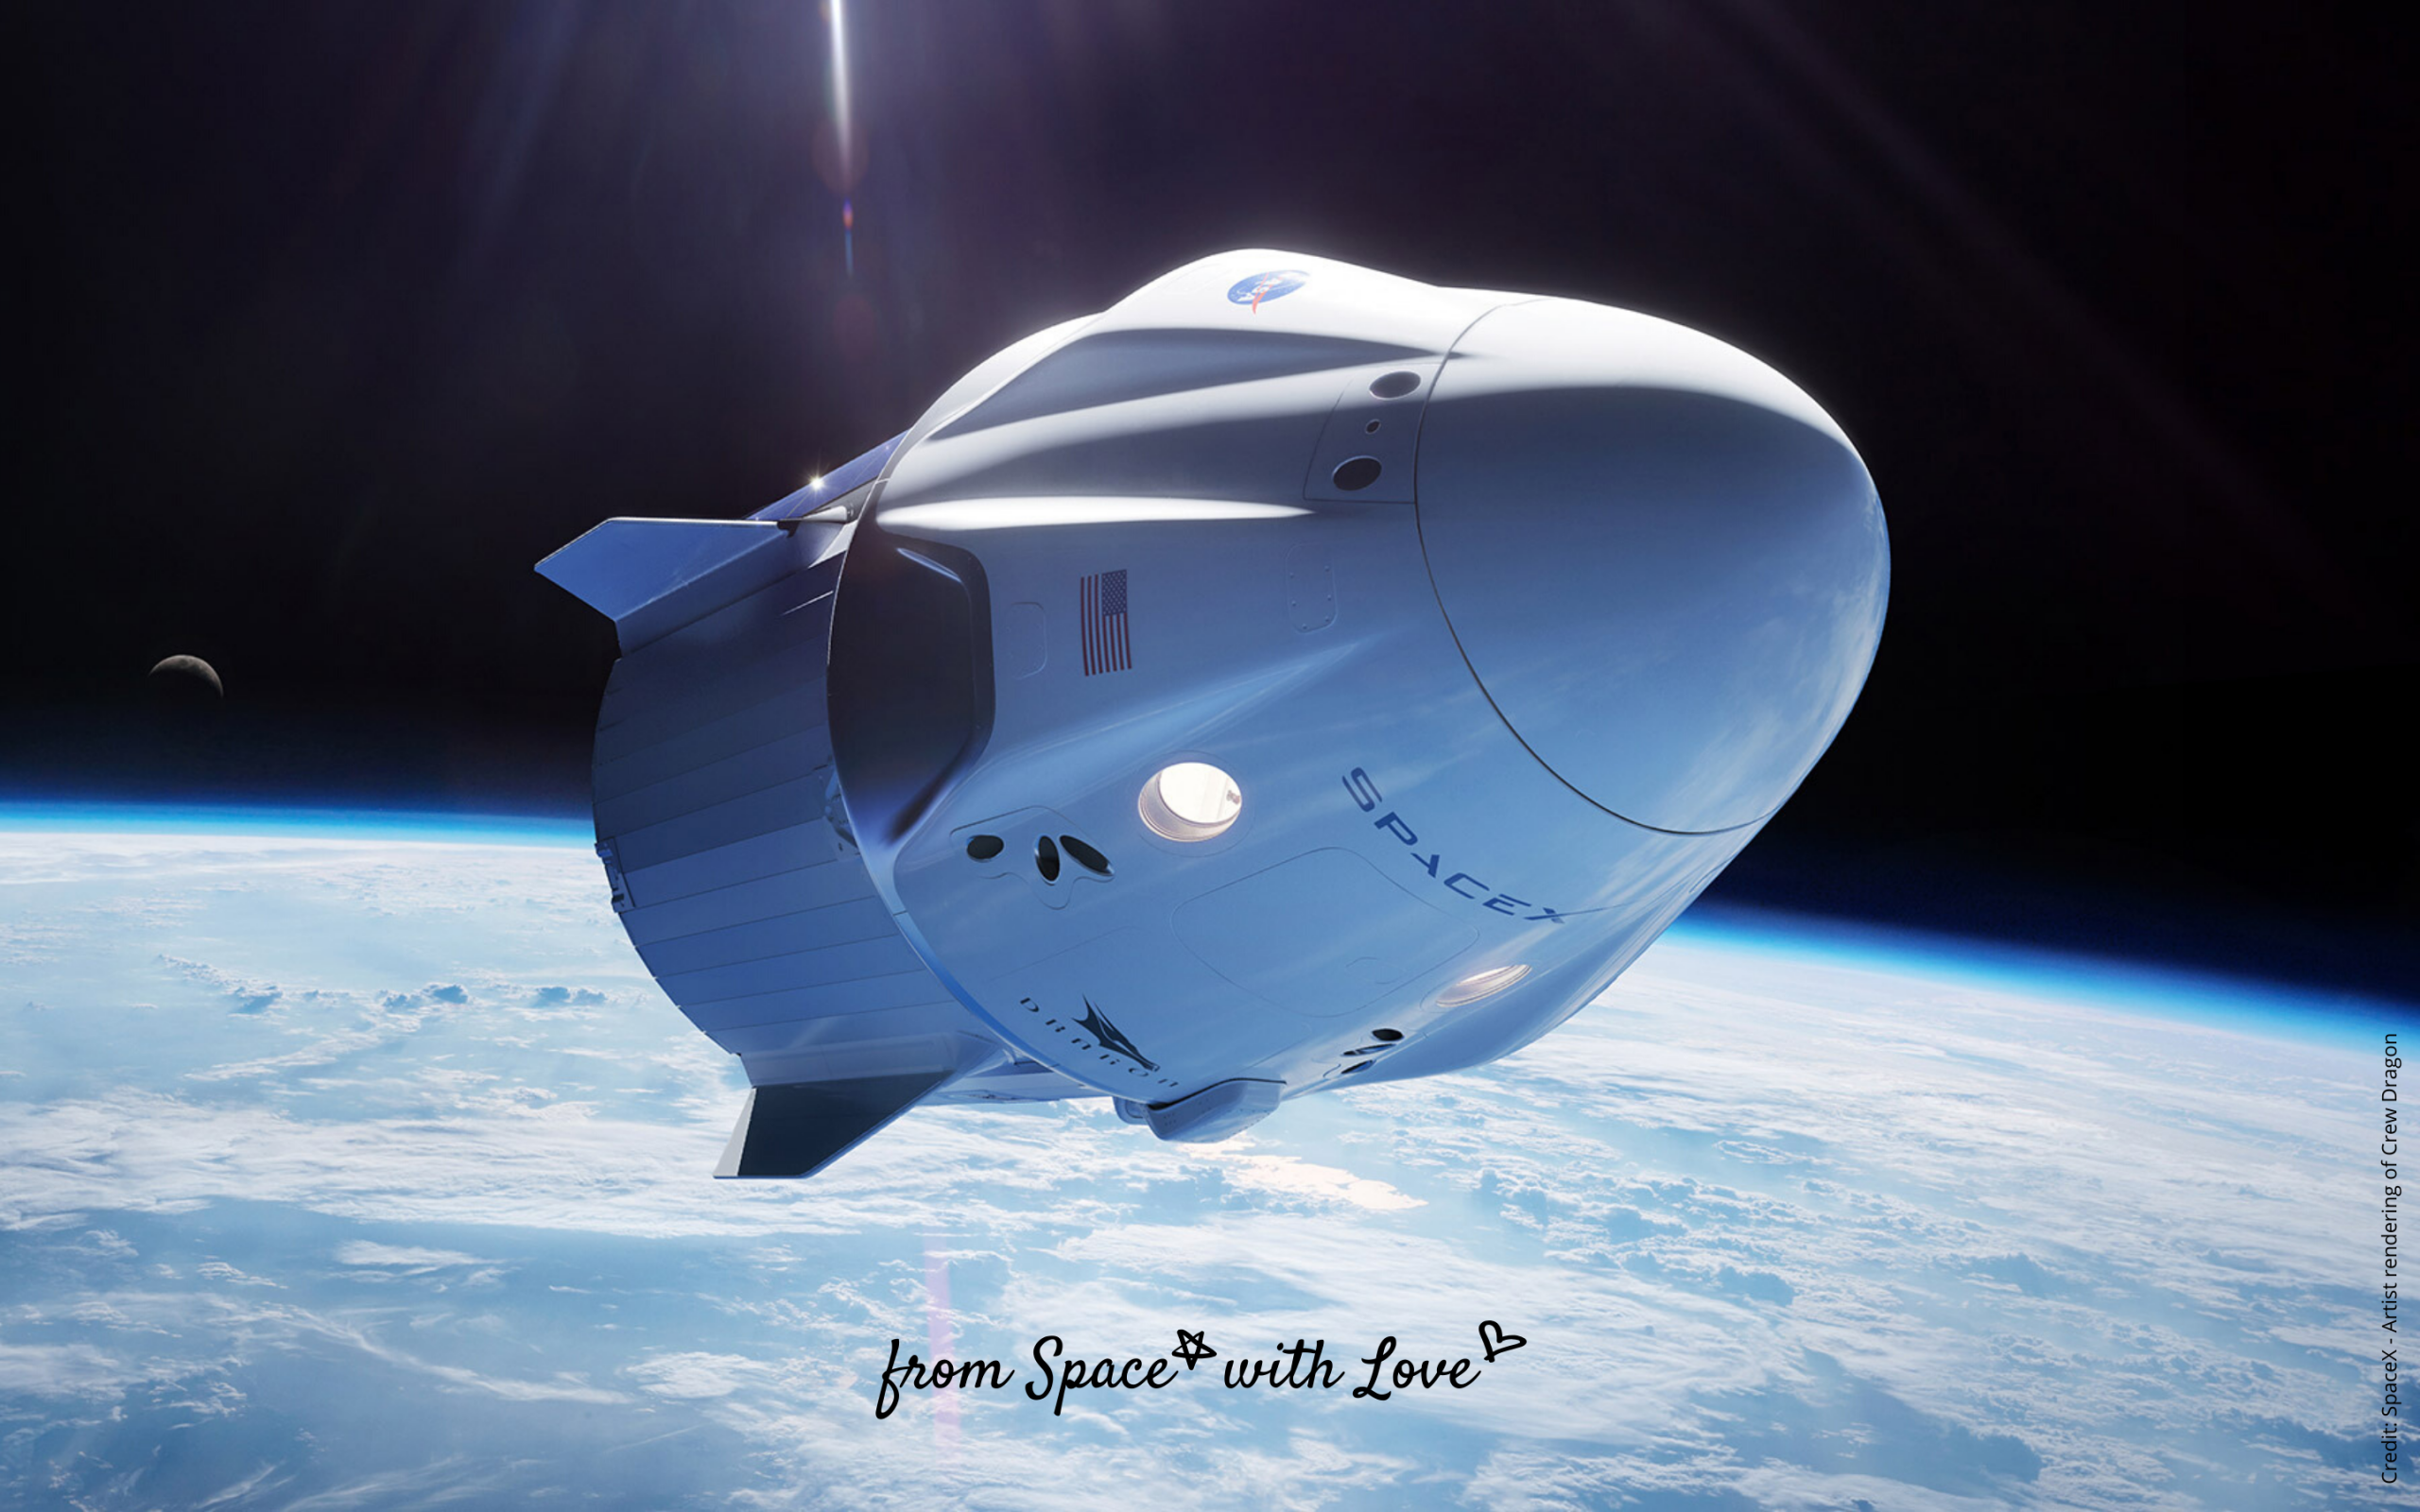 SpaceX Crew 1 Mission Space With Love